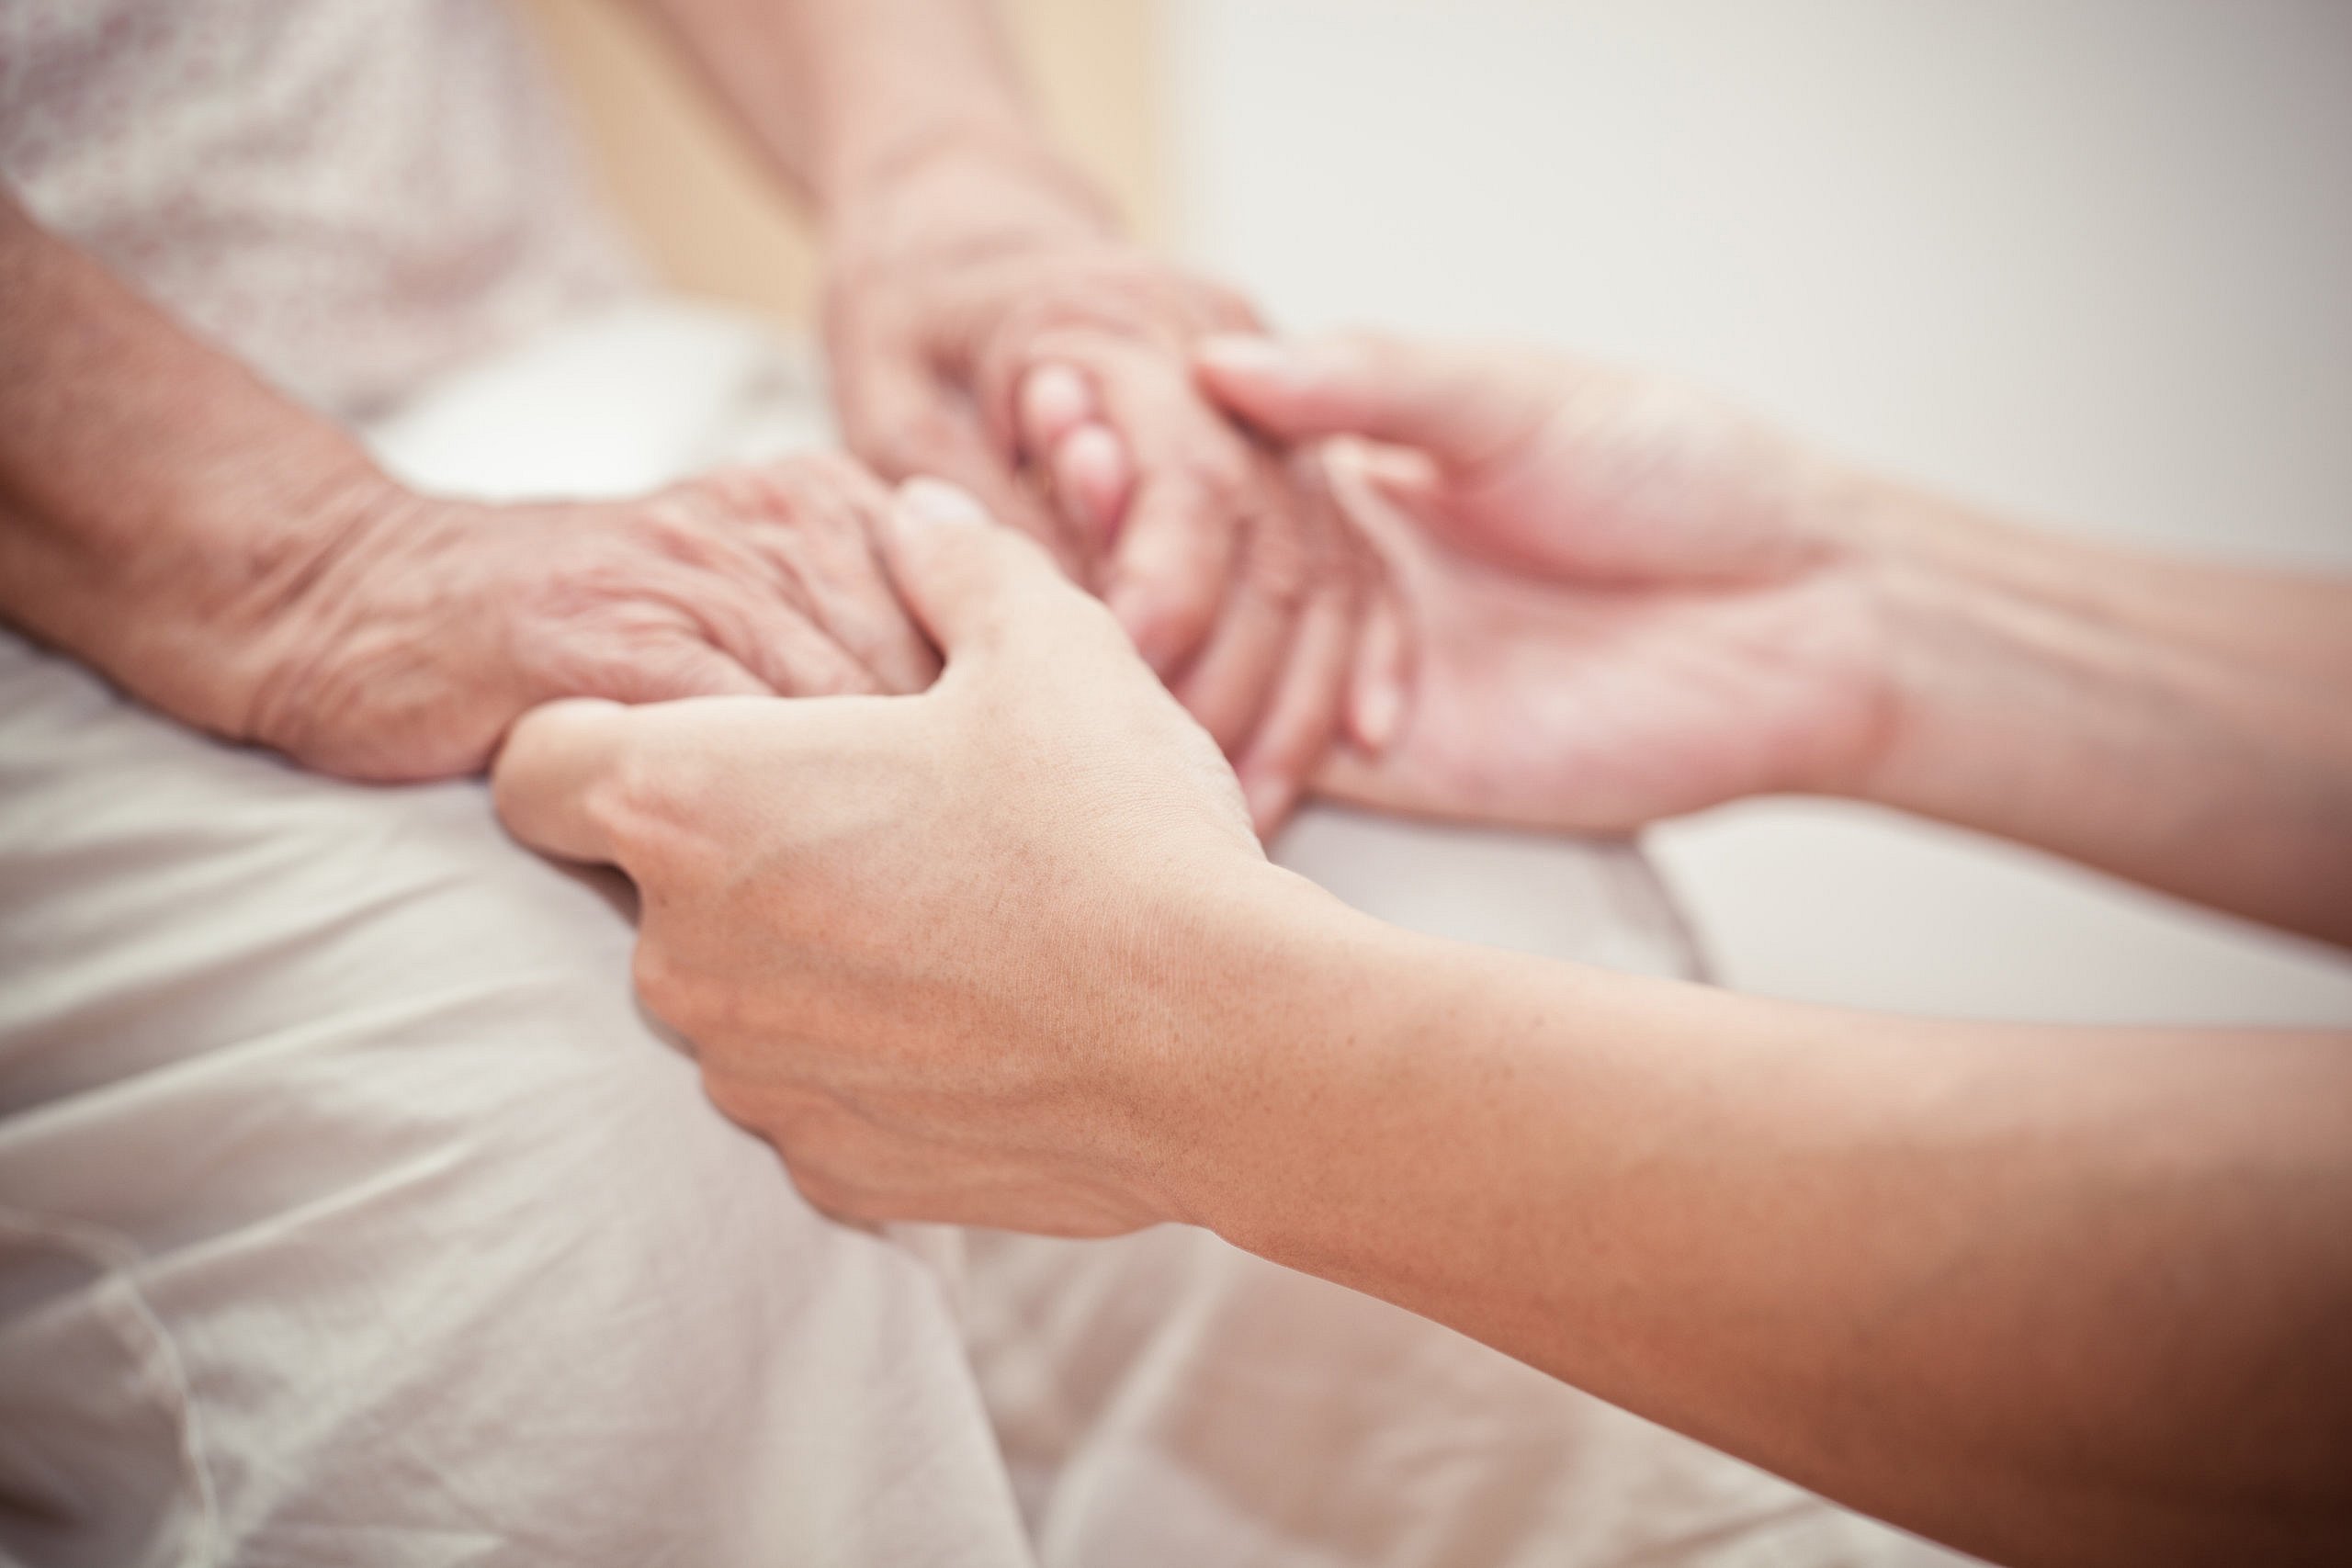 Woman with Alzheimer's holding loved one's hands.